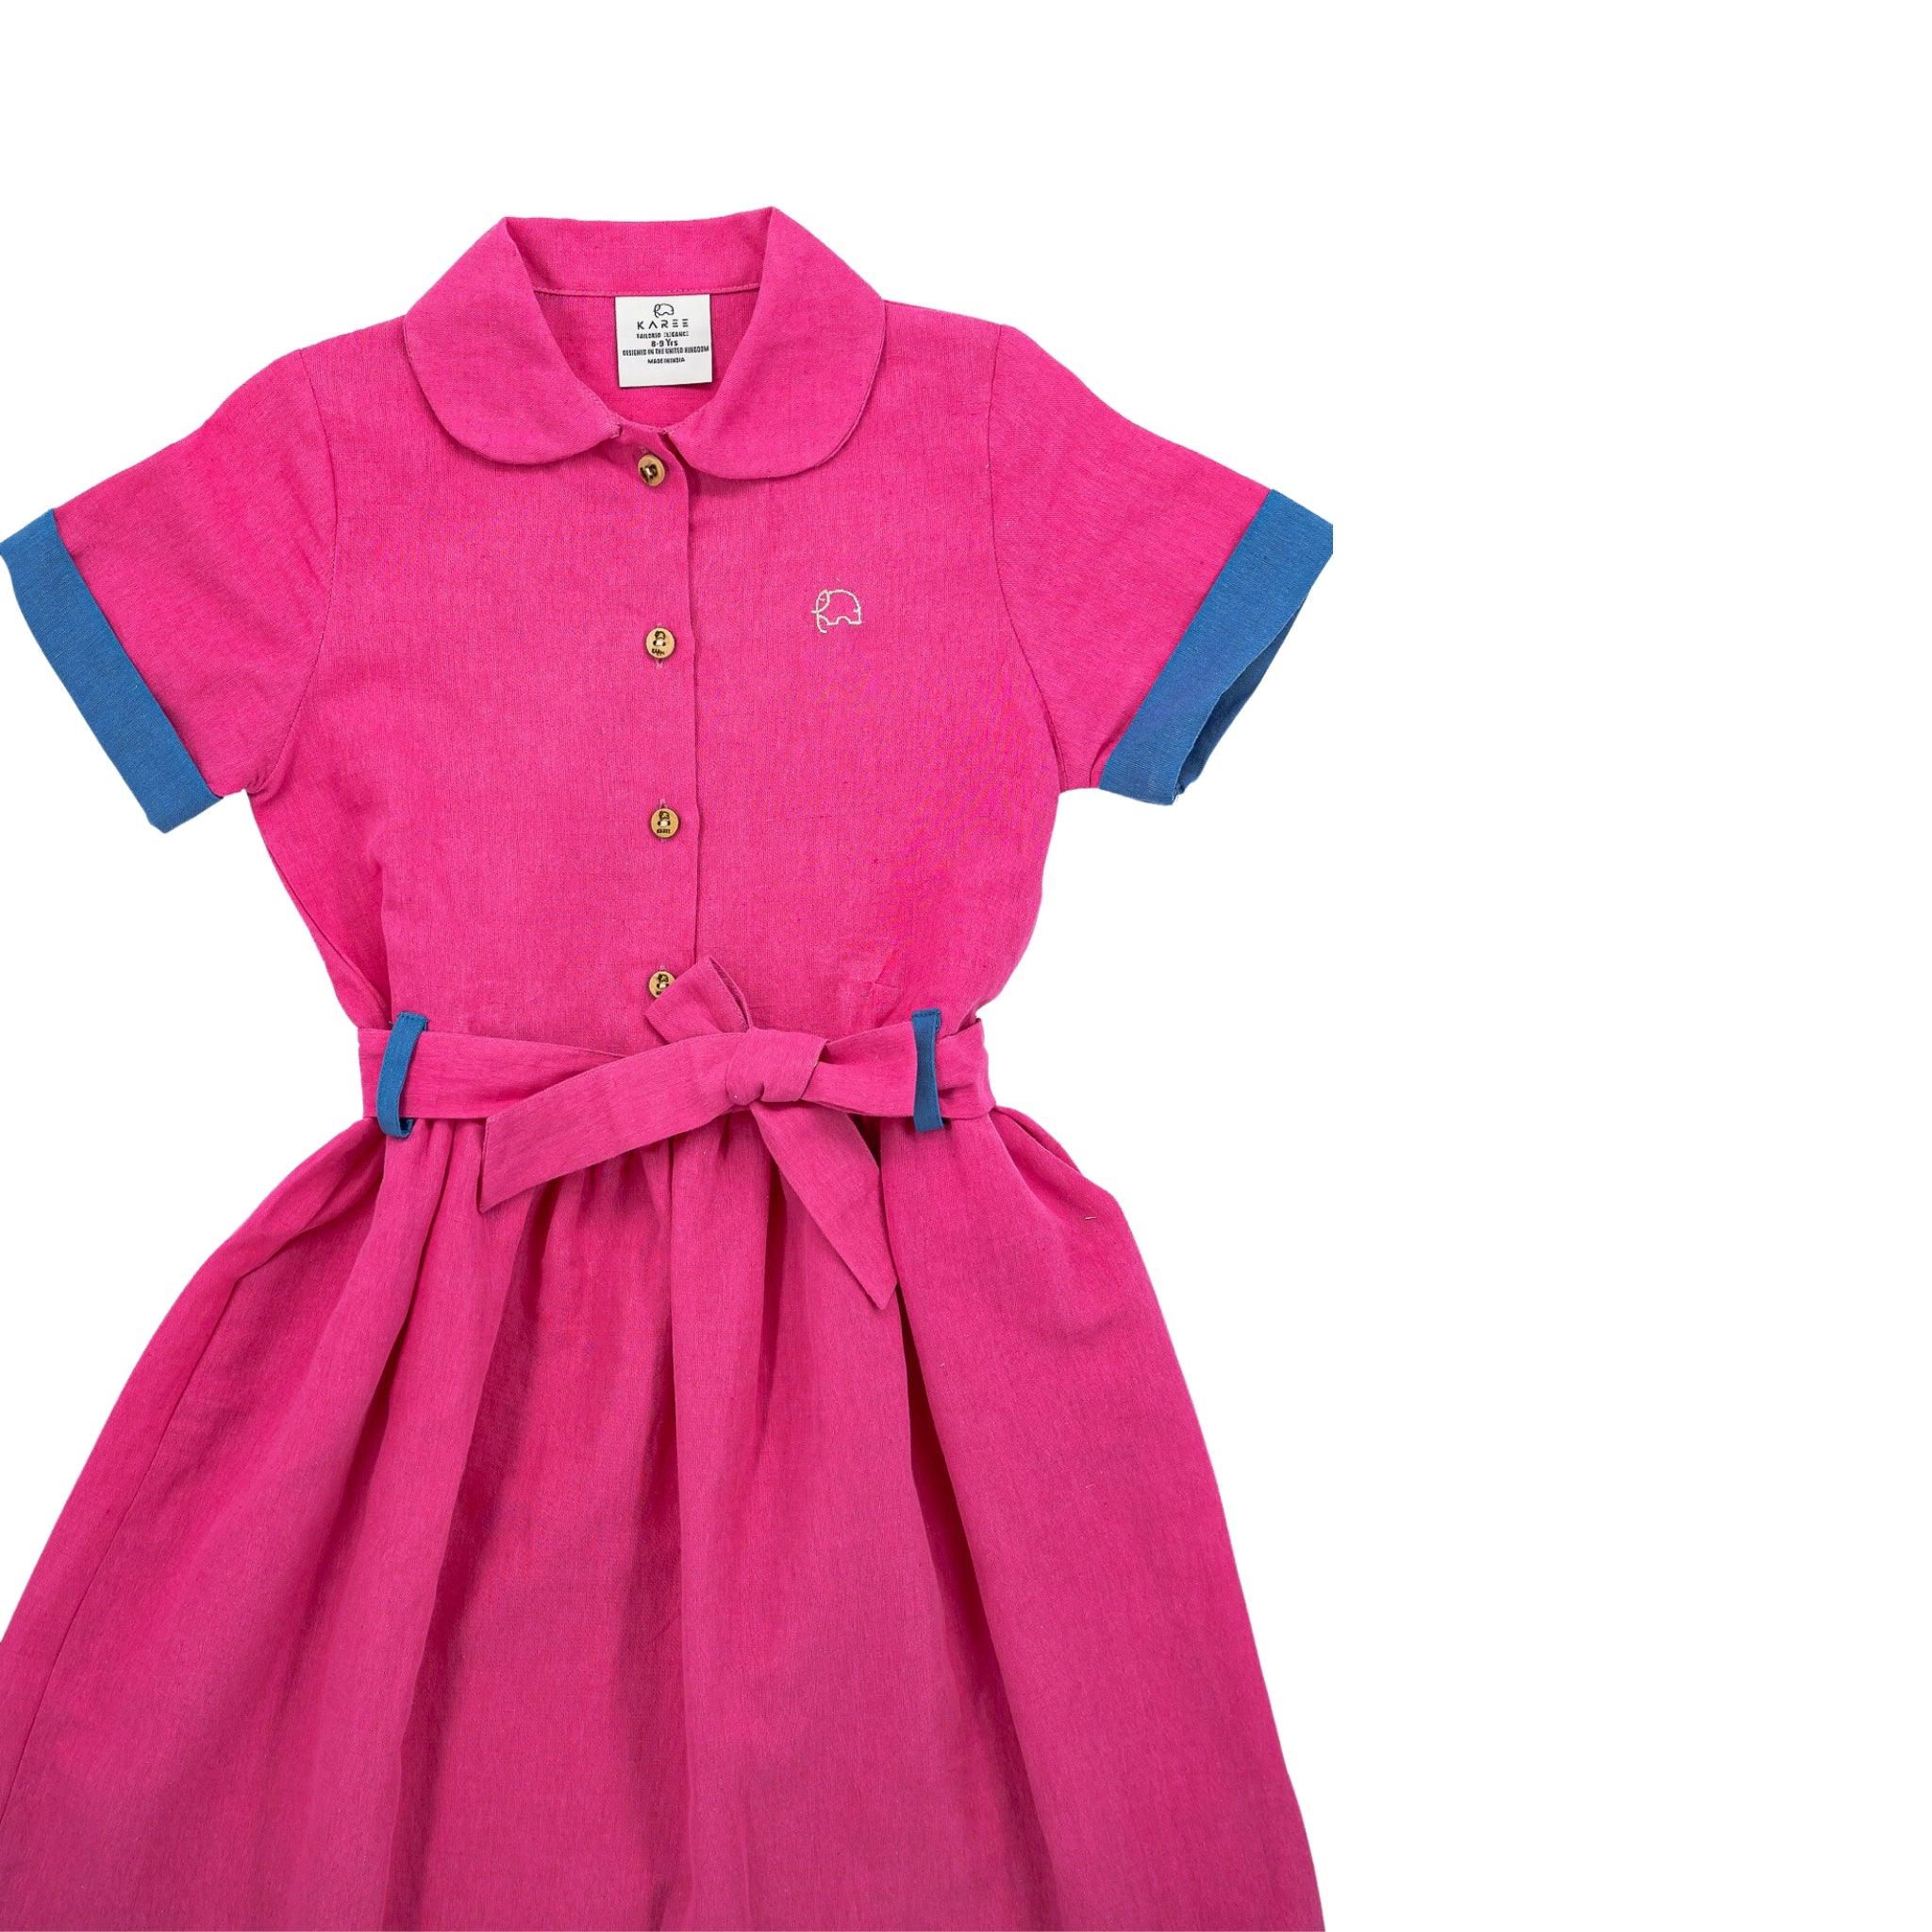 Bright Fuchsia Purple Linen Dress for Girls by Karee, with blue collar and sleeves, front buttons, and waist belt, displayed against a white background.